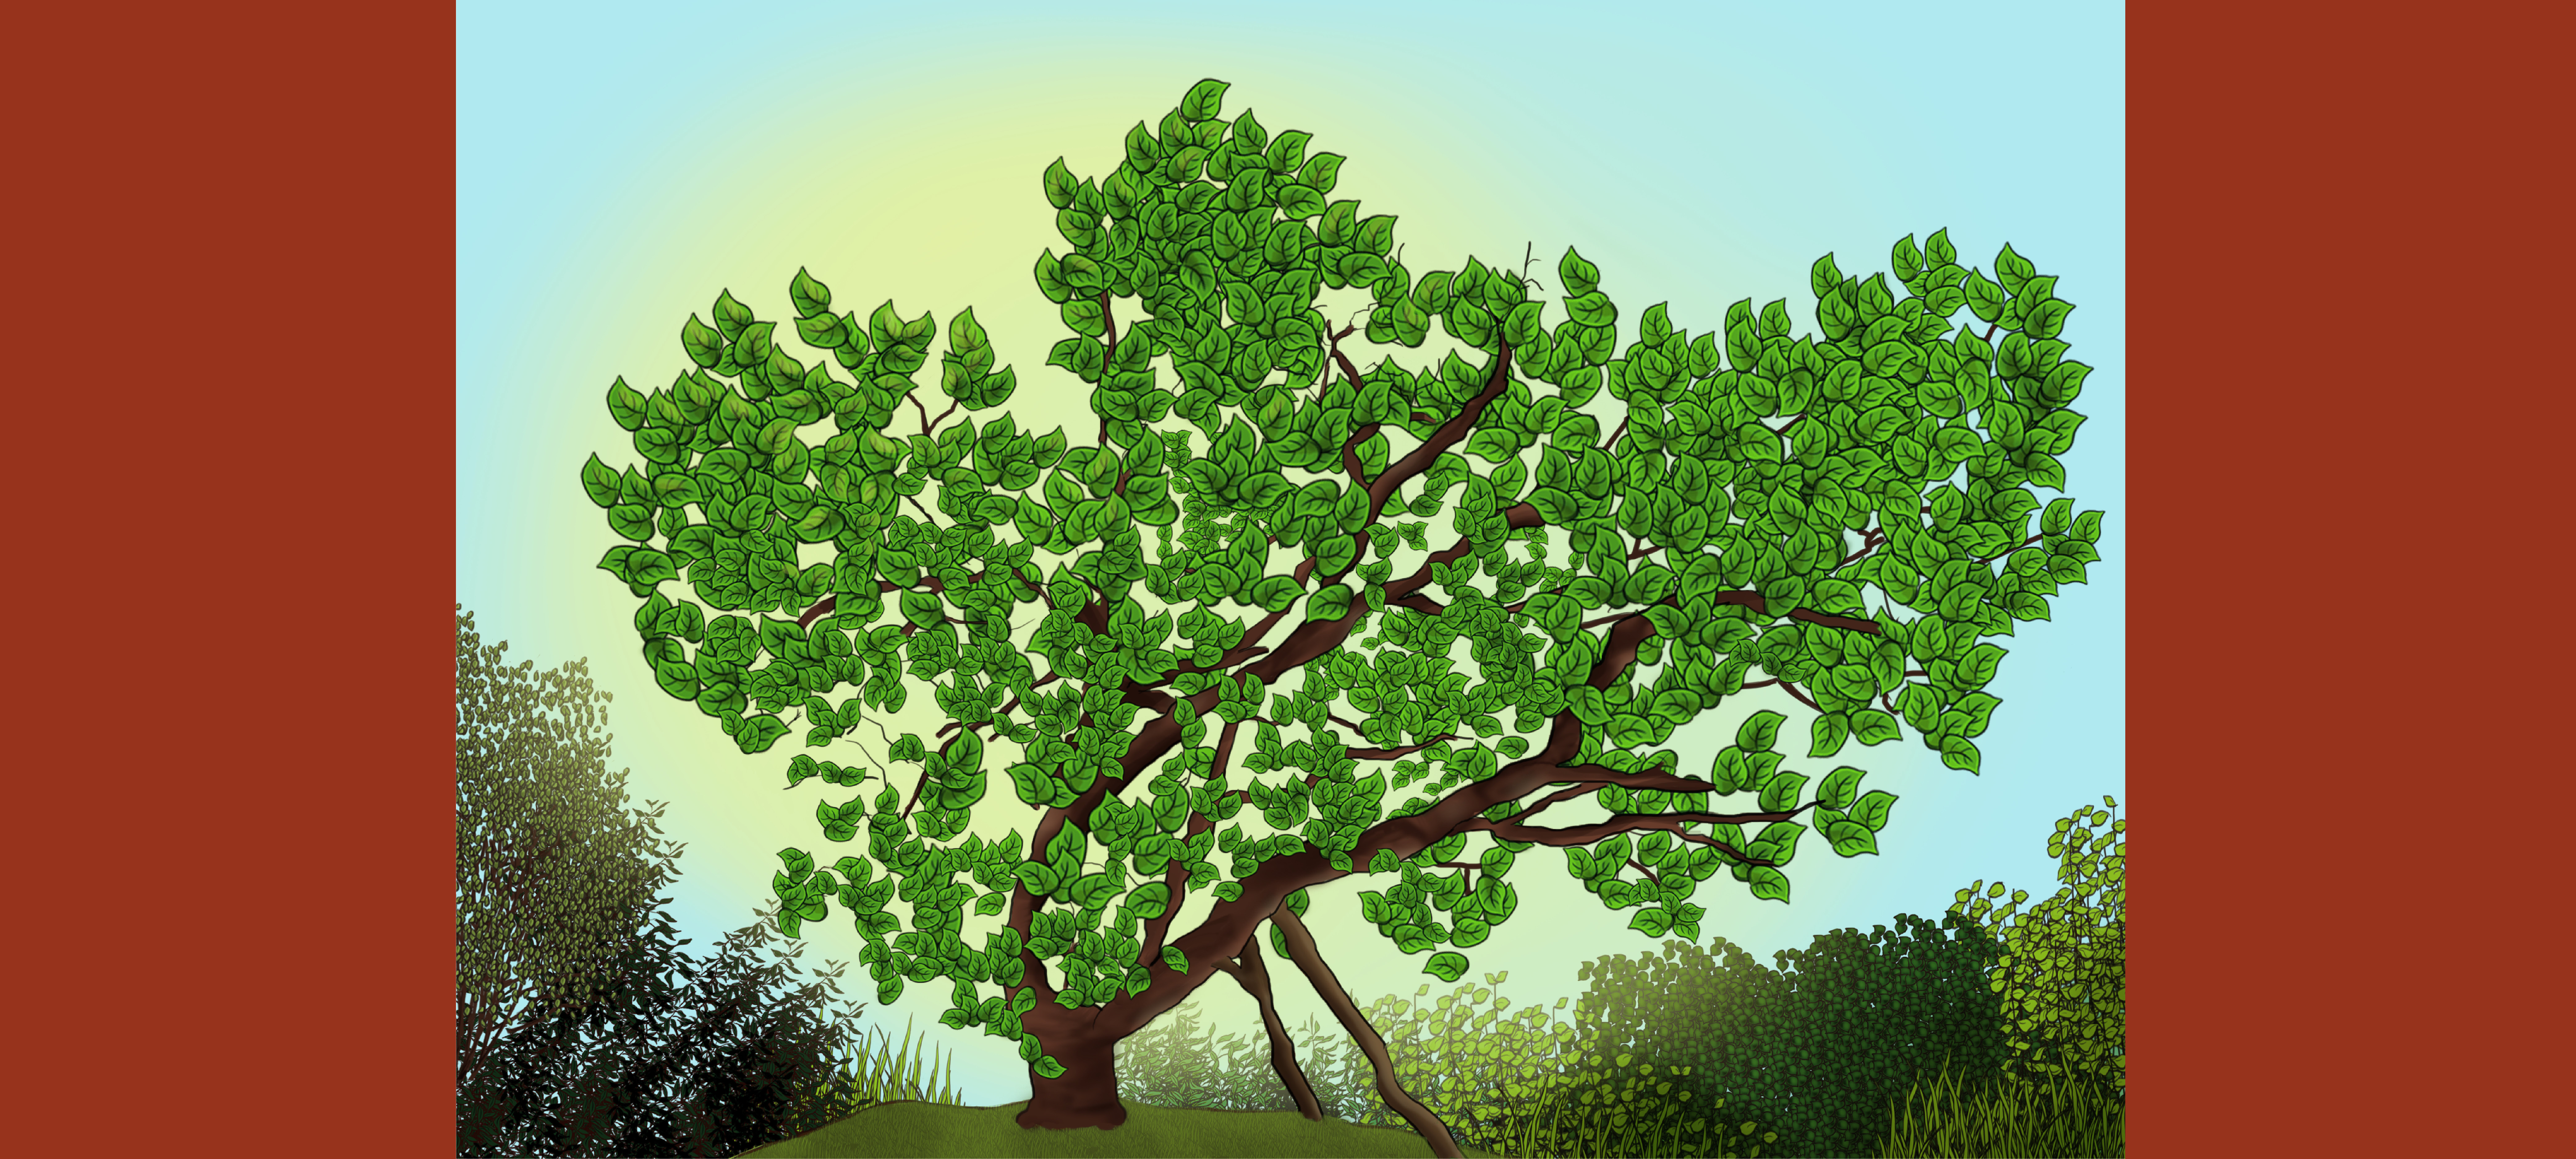 Mulberry tree virtual rhyme time 4-4.30pm